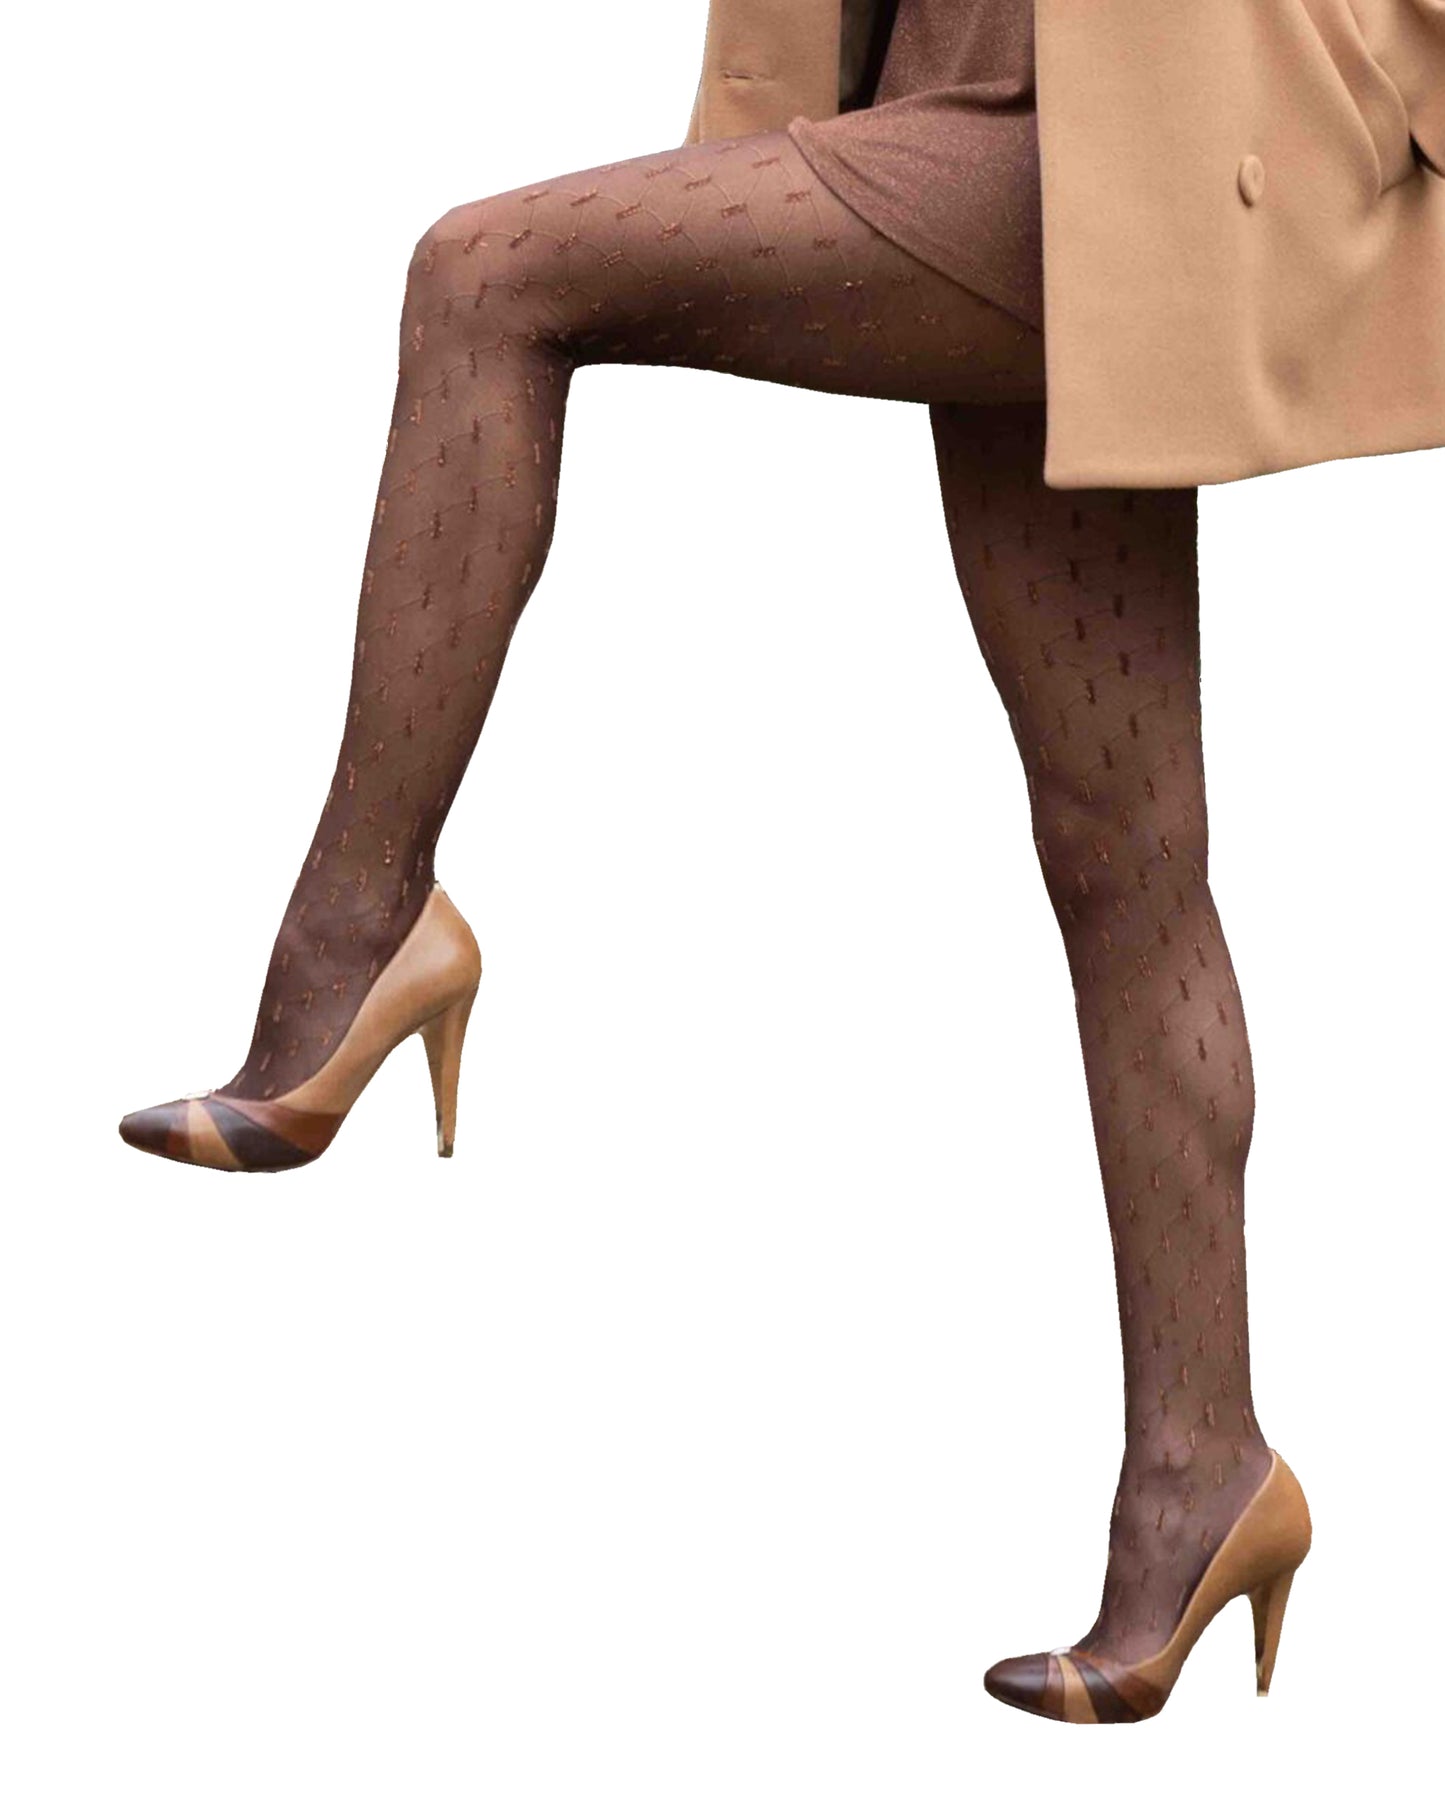 Omero 113735 Brilliant Collant - Sheer brown fashion tights with a honeycomb style pattern with bronze glitter dotted lines, worn with brown dress, tan coat and high heels.